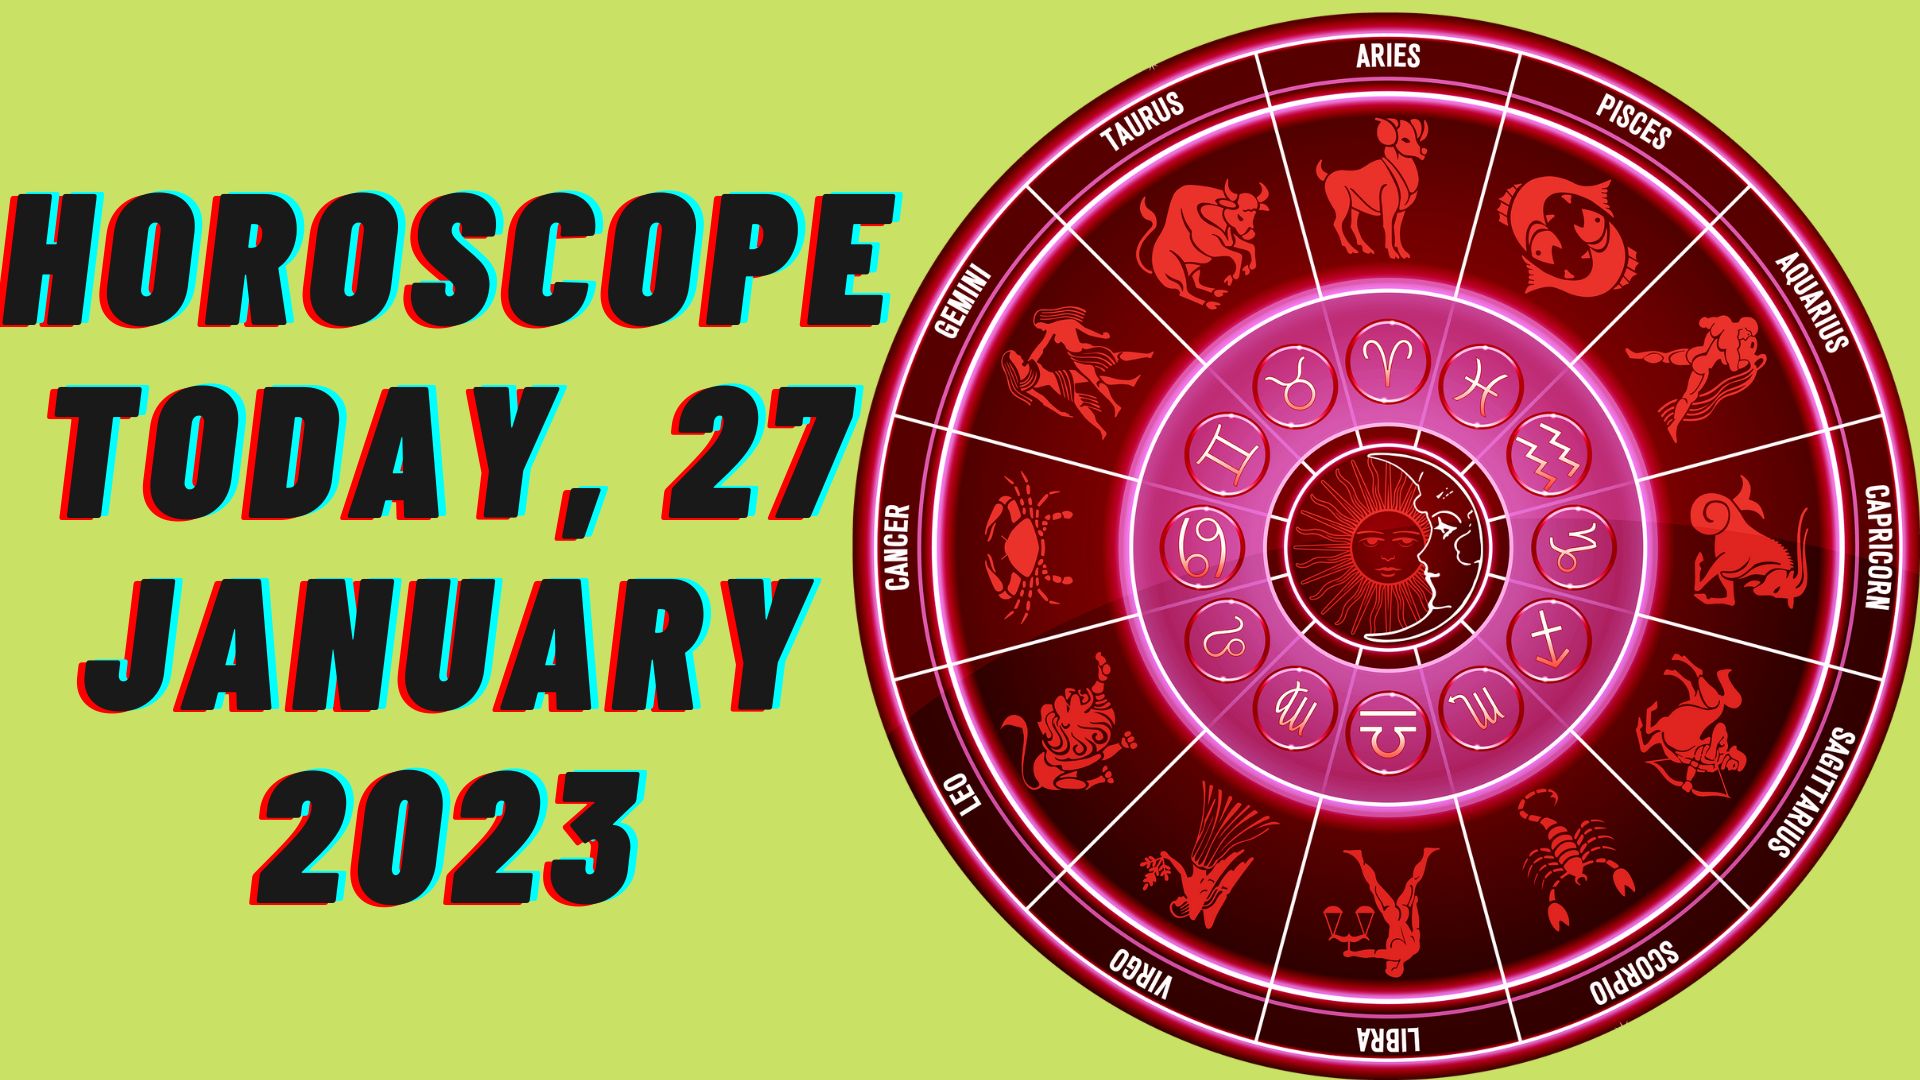 Horoscope Today, 27 January 2023 - Check Here Astrological Prediction For All Sun Signs